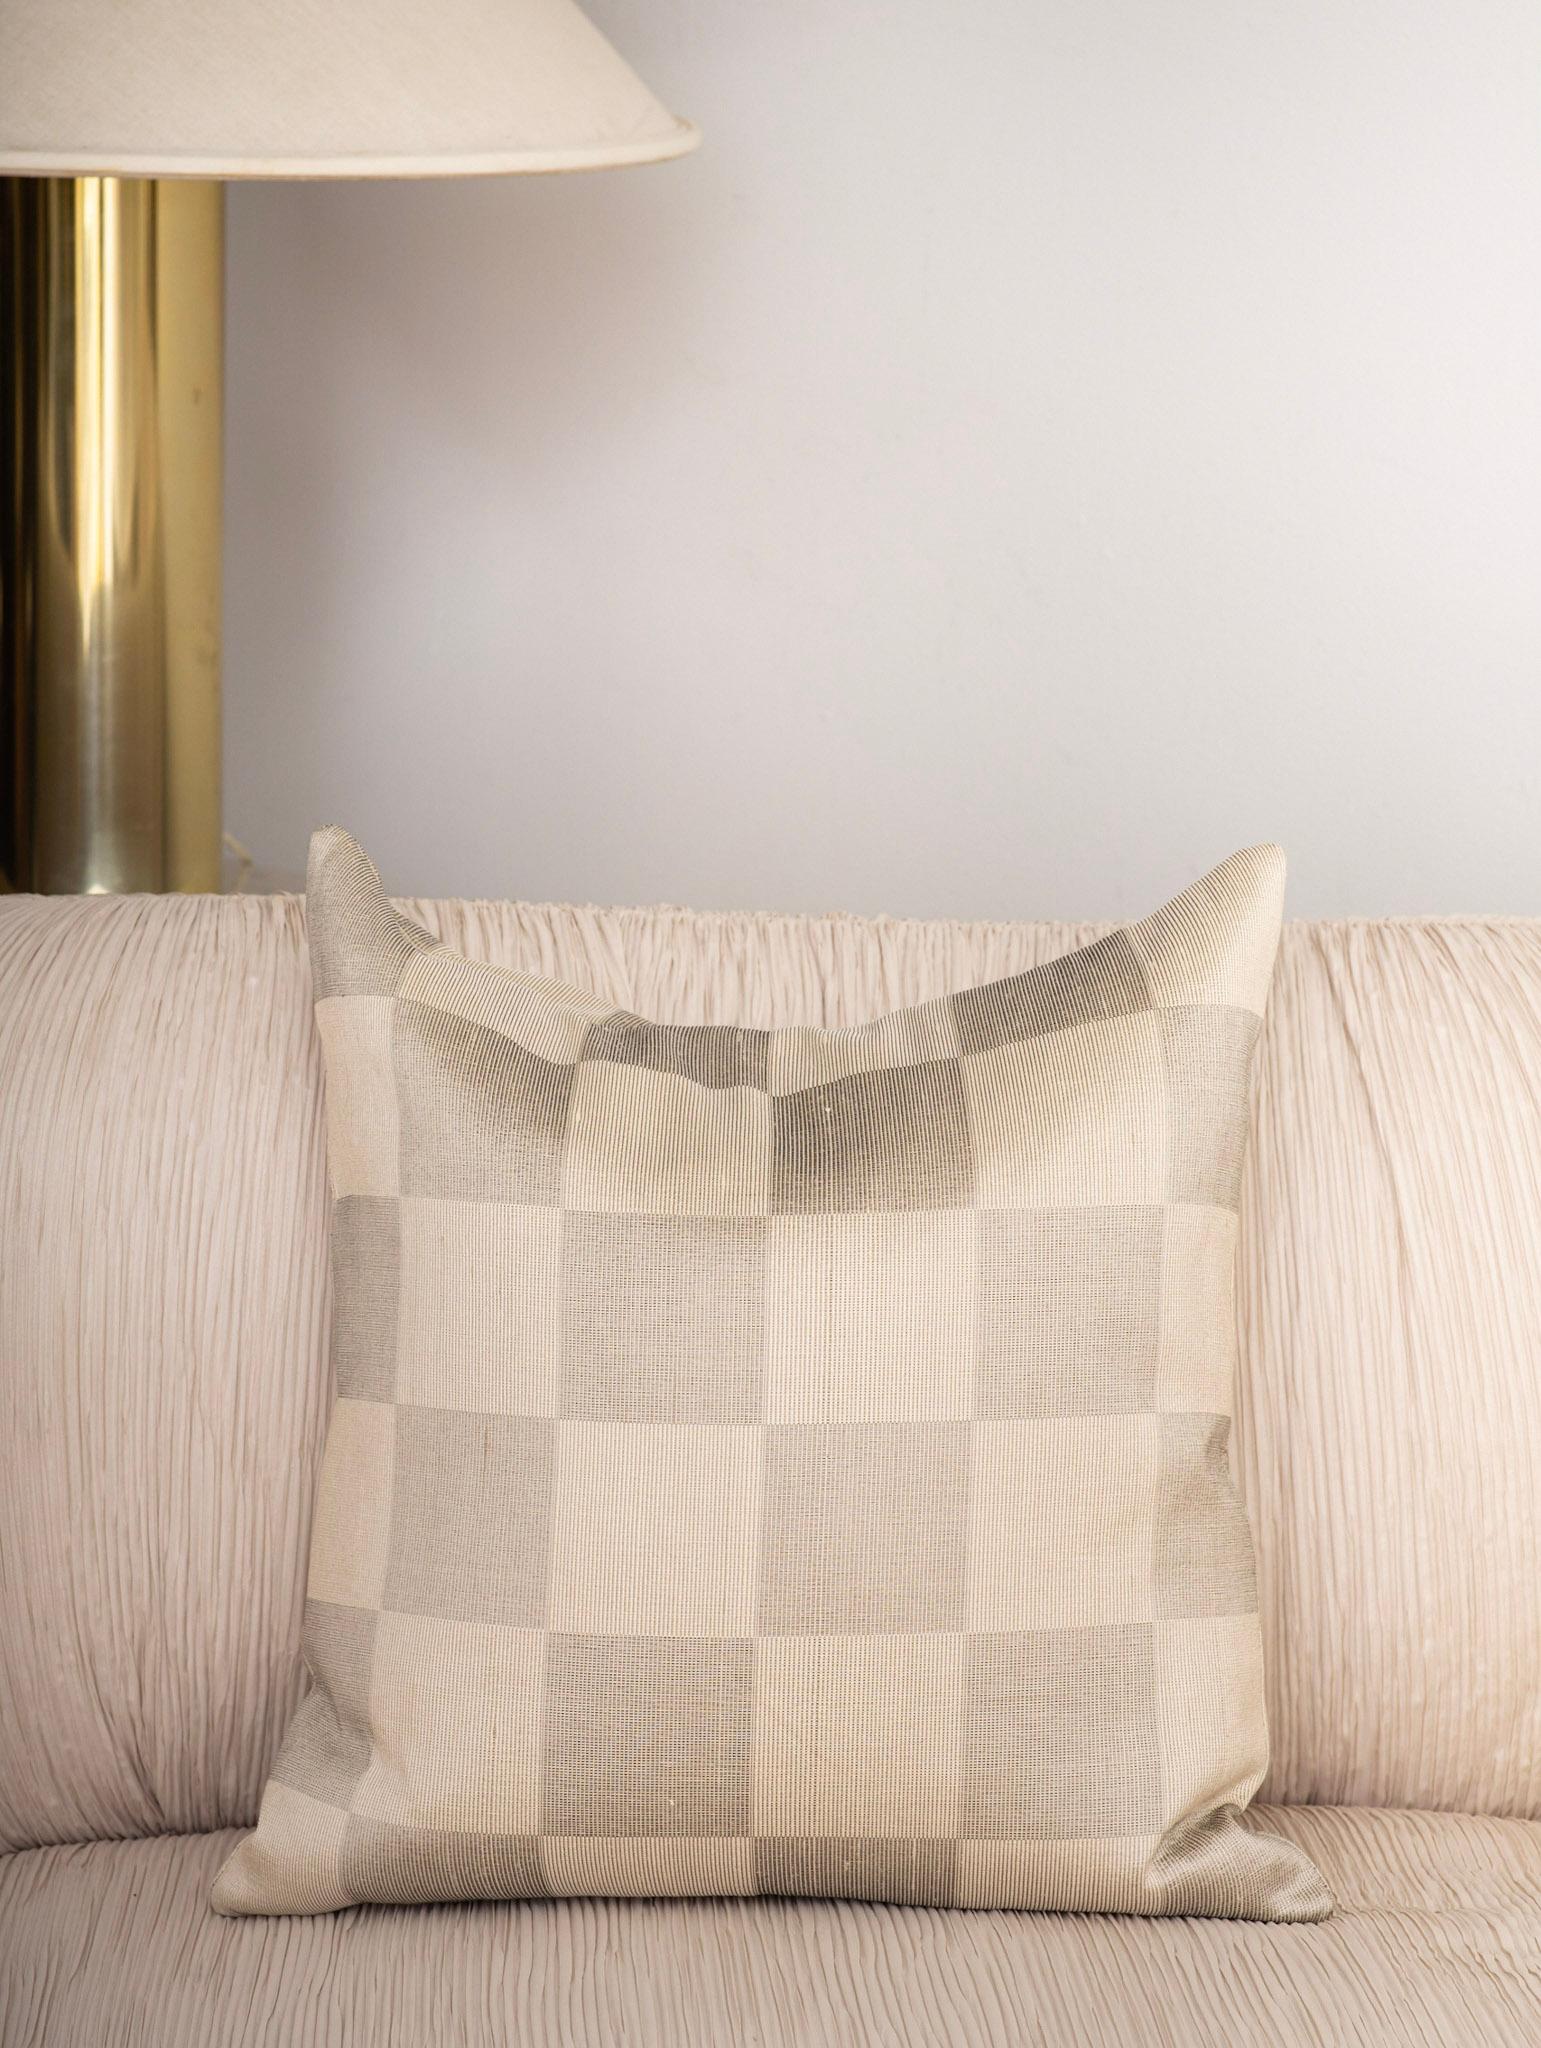 North American Textured Grey & Ivory Checkered Pillow For Sale